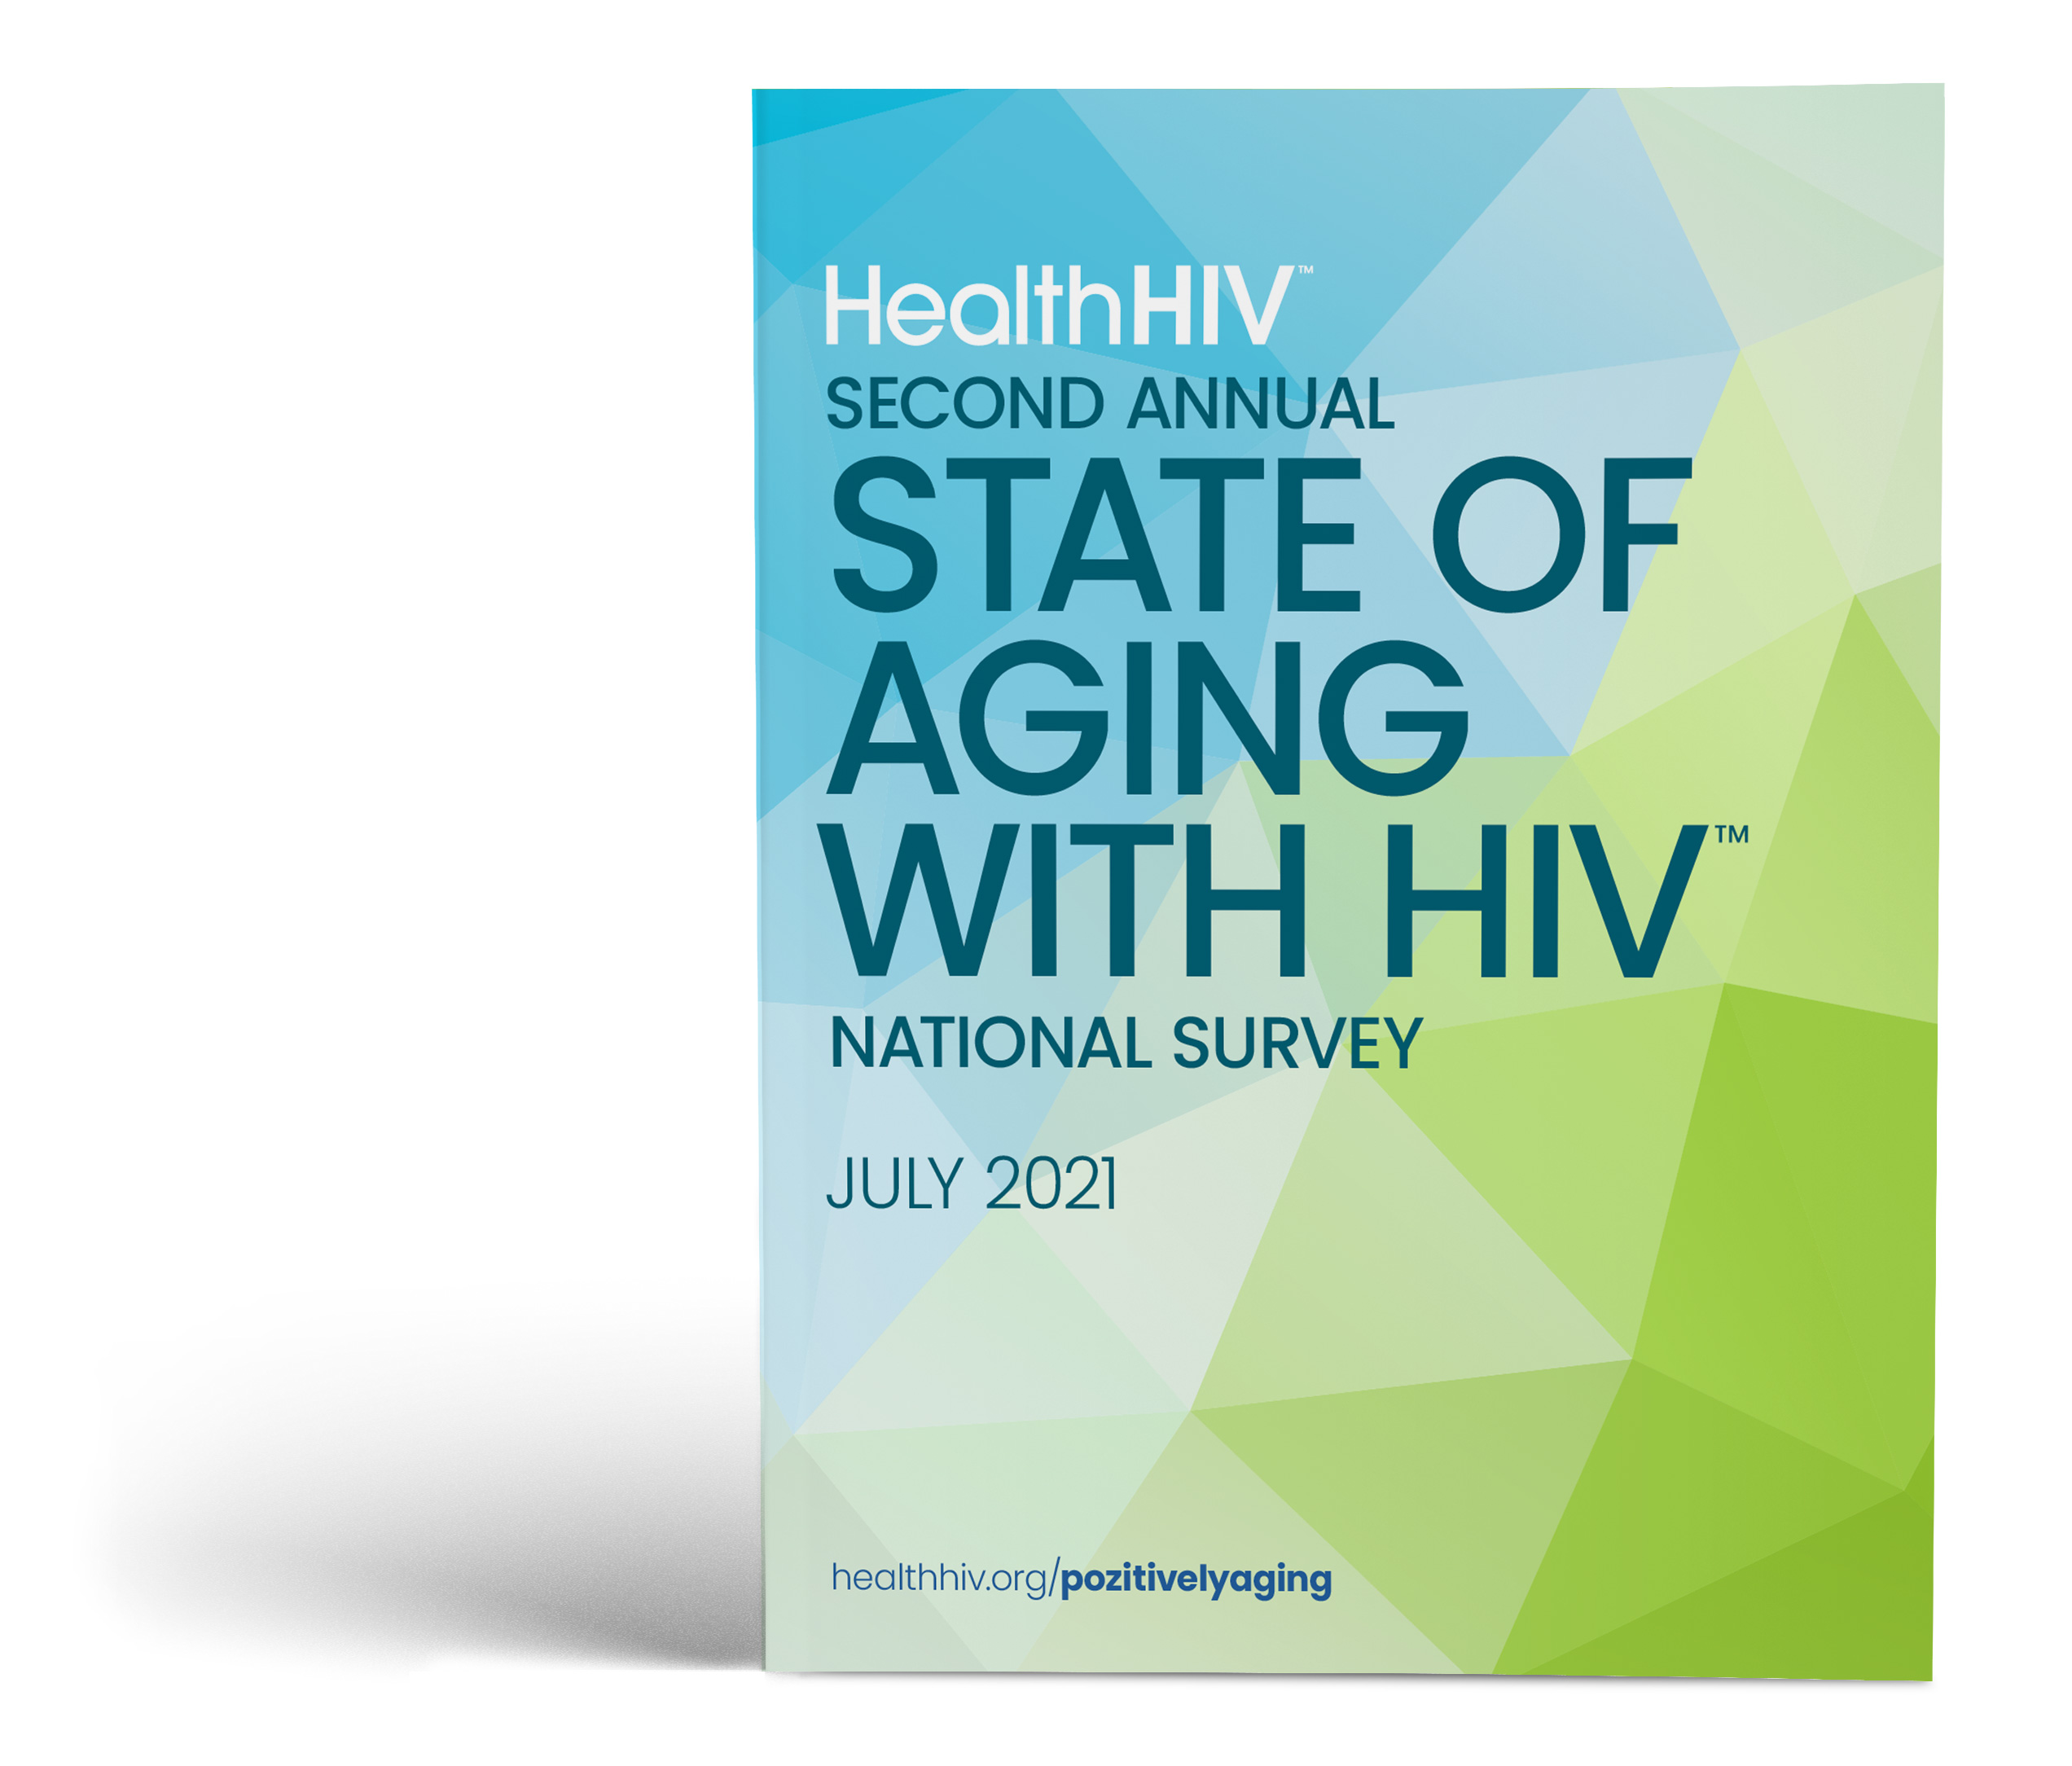 Second Annual State Of Aging With HIV National Survey